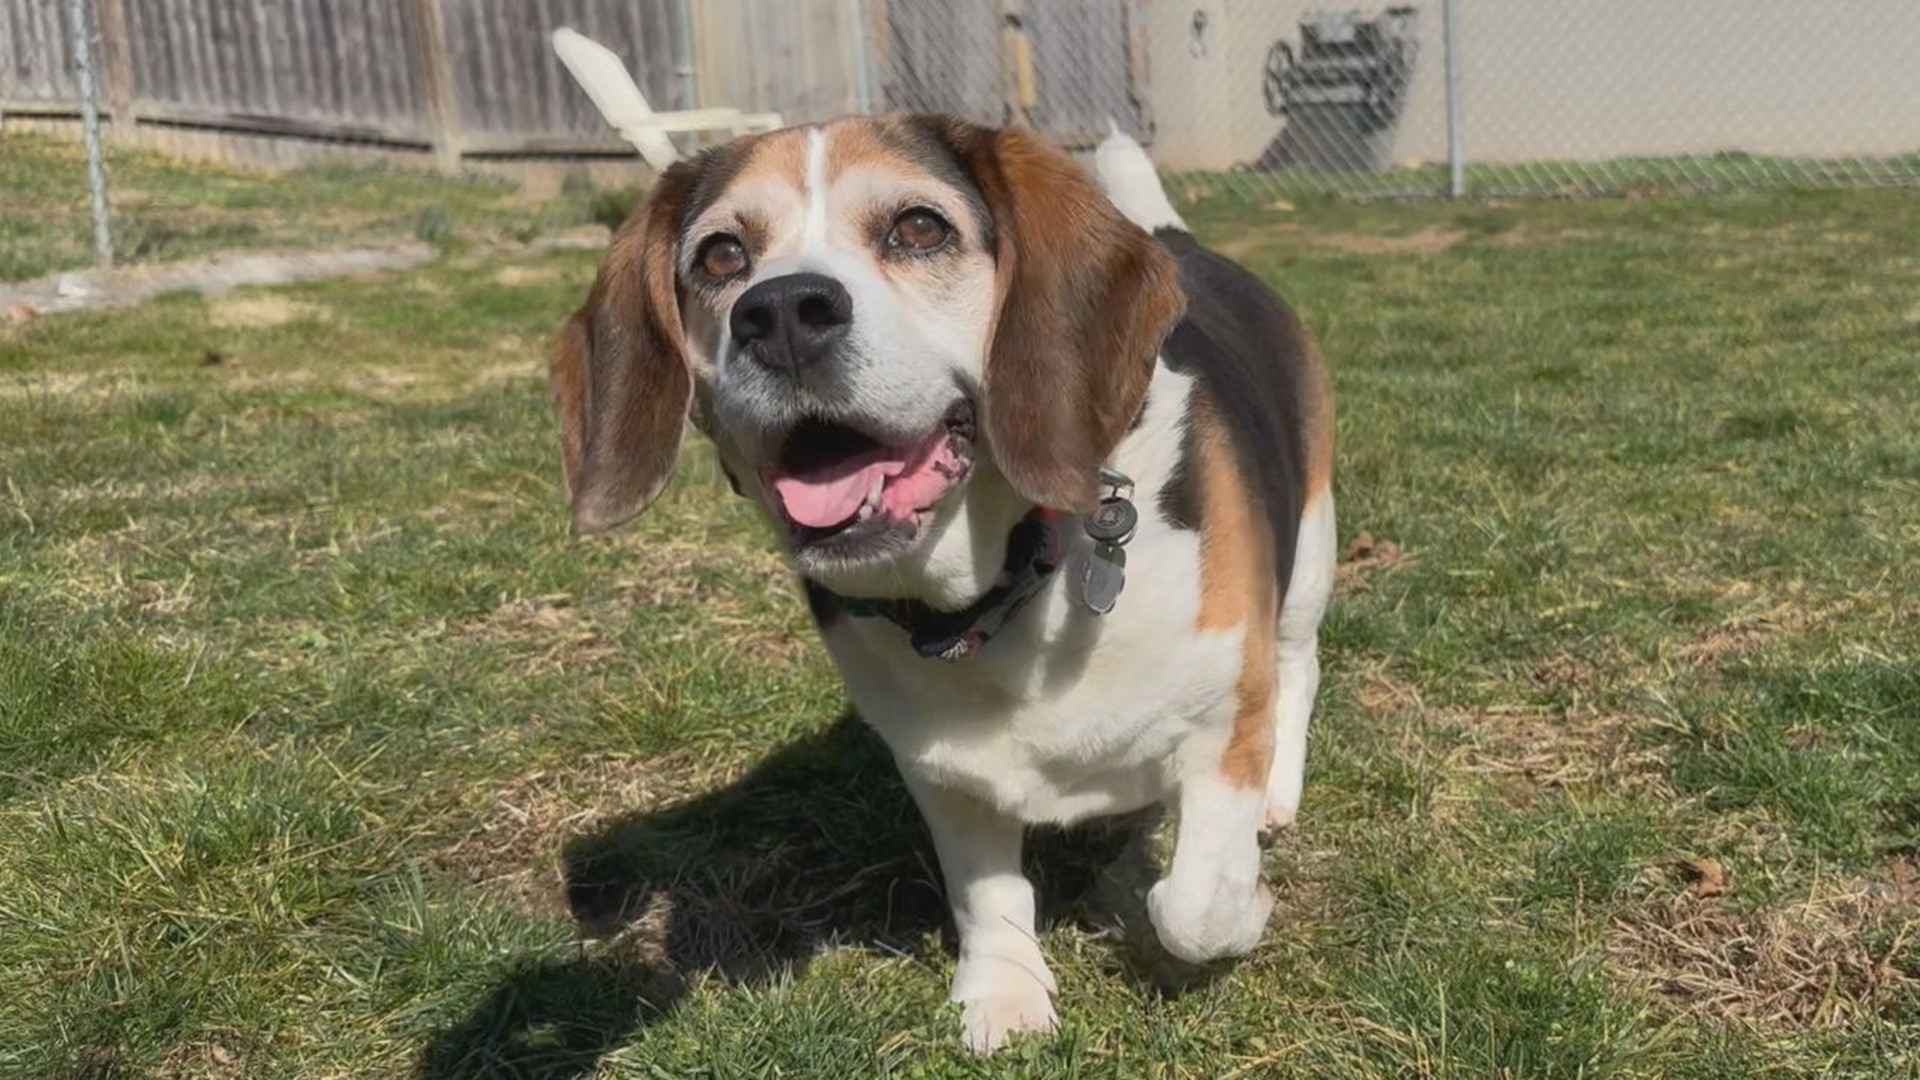 Duke is a senior pup who's looking for the perfect retirement home. While he may be older, he still loves chasing squeaky toys and playing with his people.